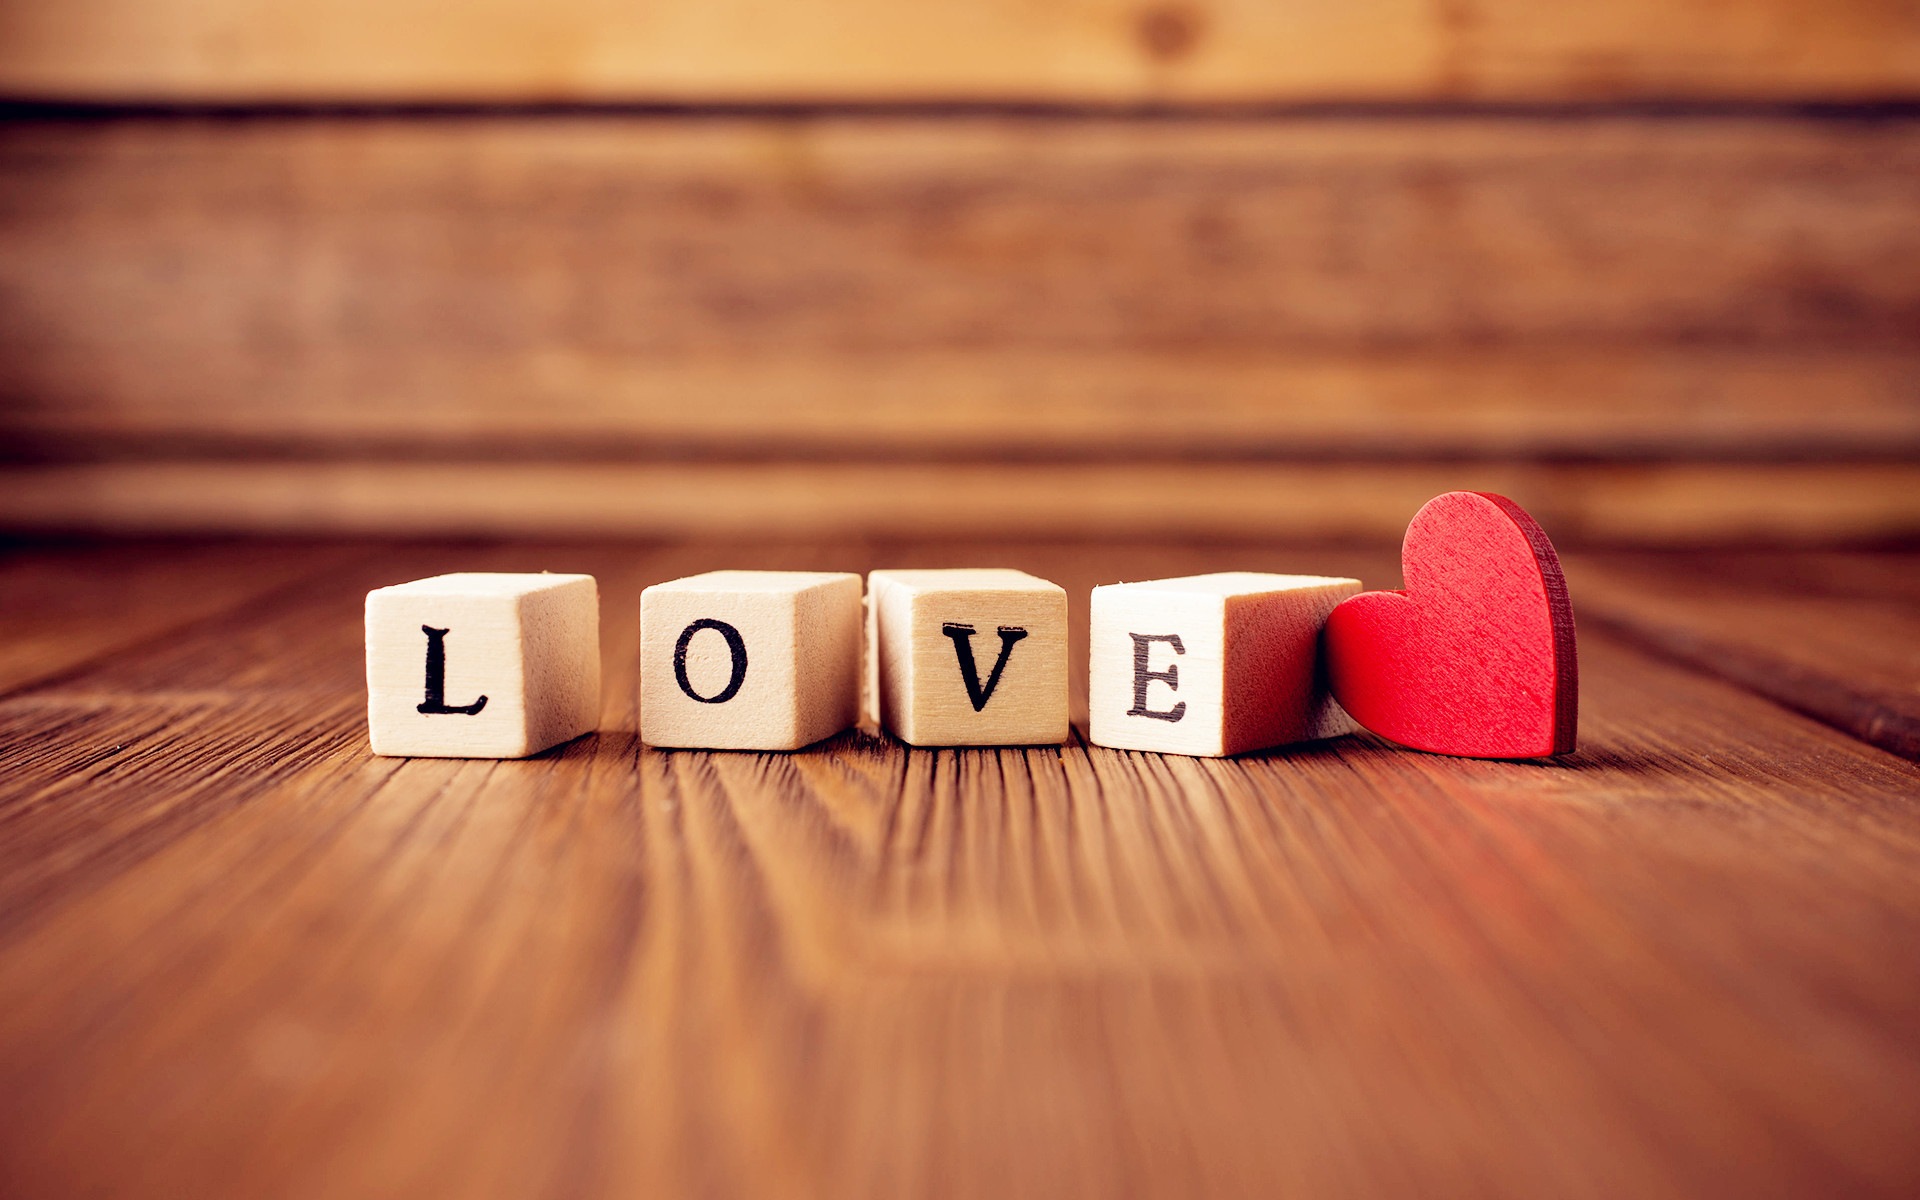 The theme of love, creative heart-shaped HD wallpapers #2 - 1920x1200